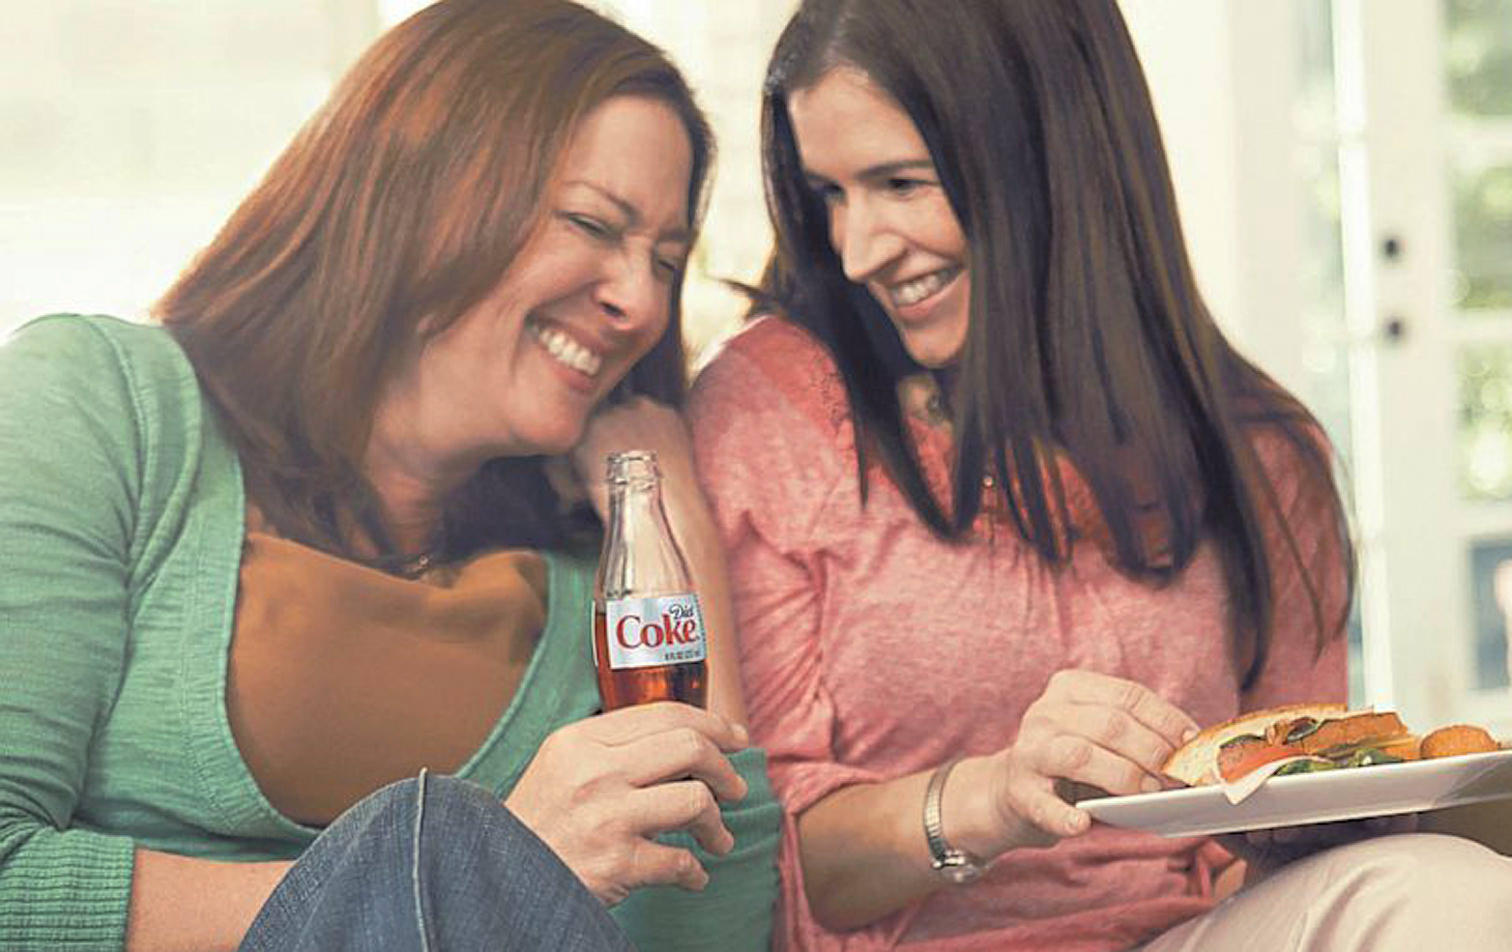 The company's new Diet Coke advert defends the use of aspartame in sugar-free drinks